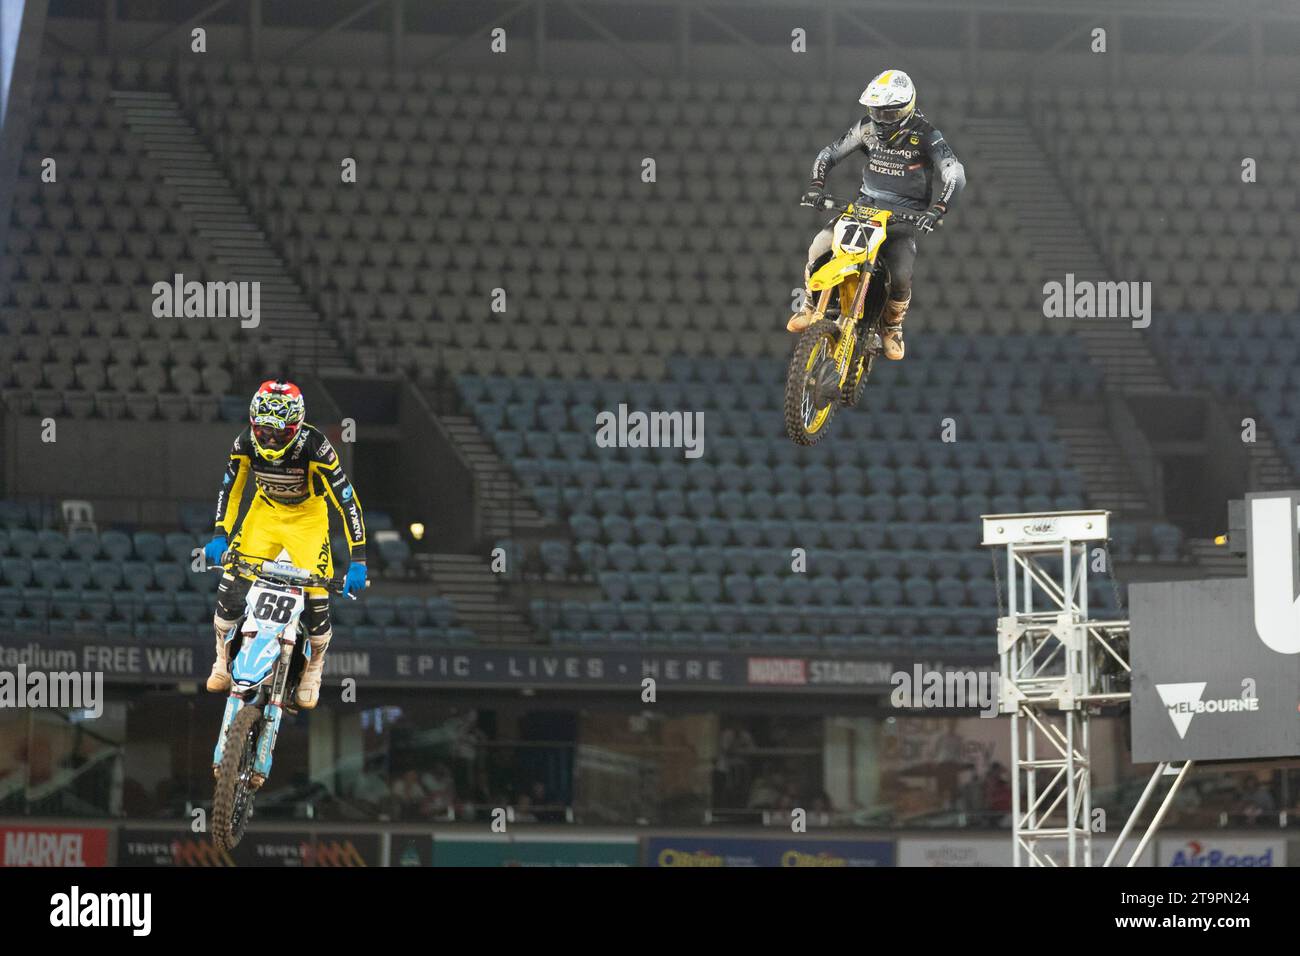 Melbourne, Australia, 25 November, 2023. Kyle Chisholm of United States on the Pipes Motorsports Group SUZUKI during the WSX Australian Grand Prix at Marvel Stadium on November 25, 2023 in Melbourne, Australia. Credit: Dave Hewison/Alamy Live News Stock Photo